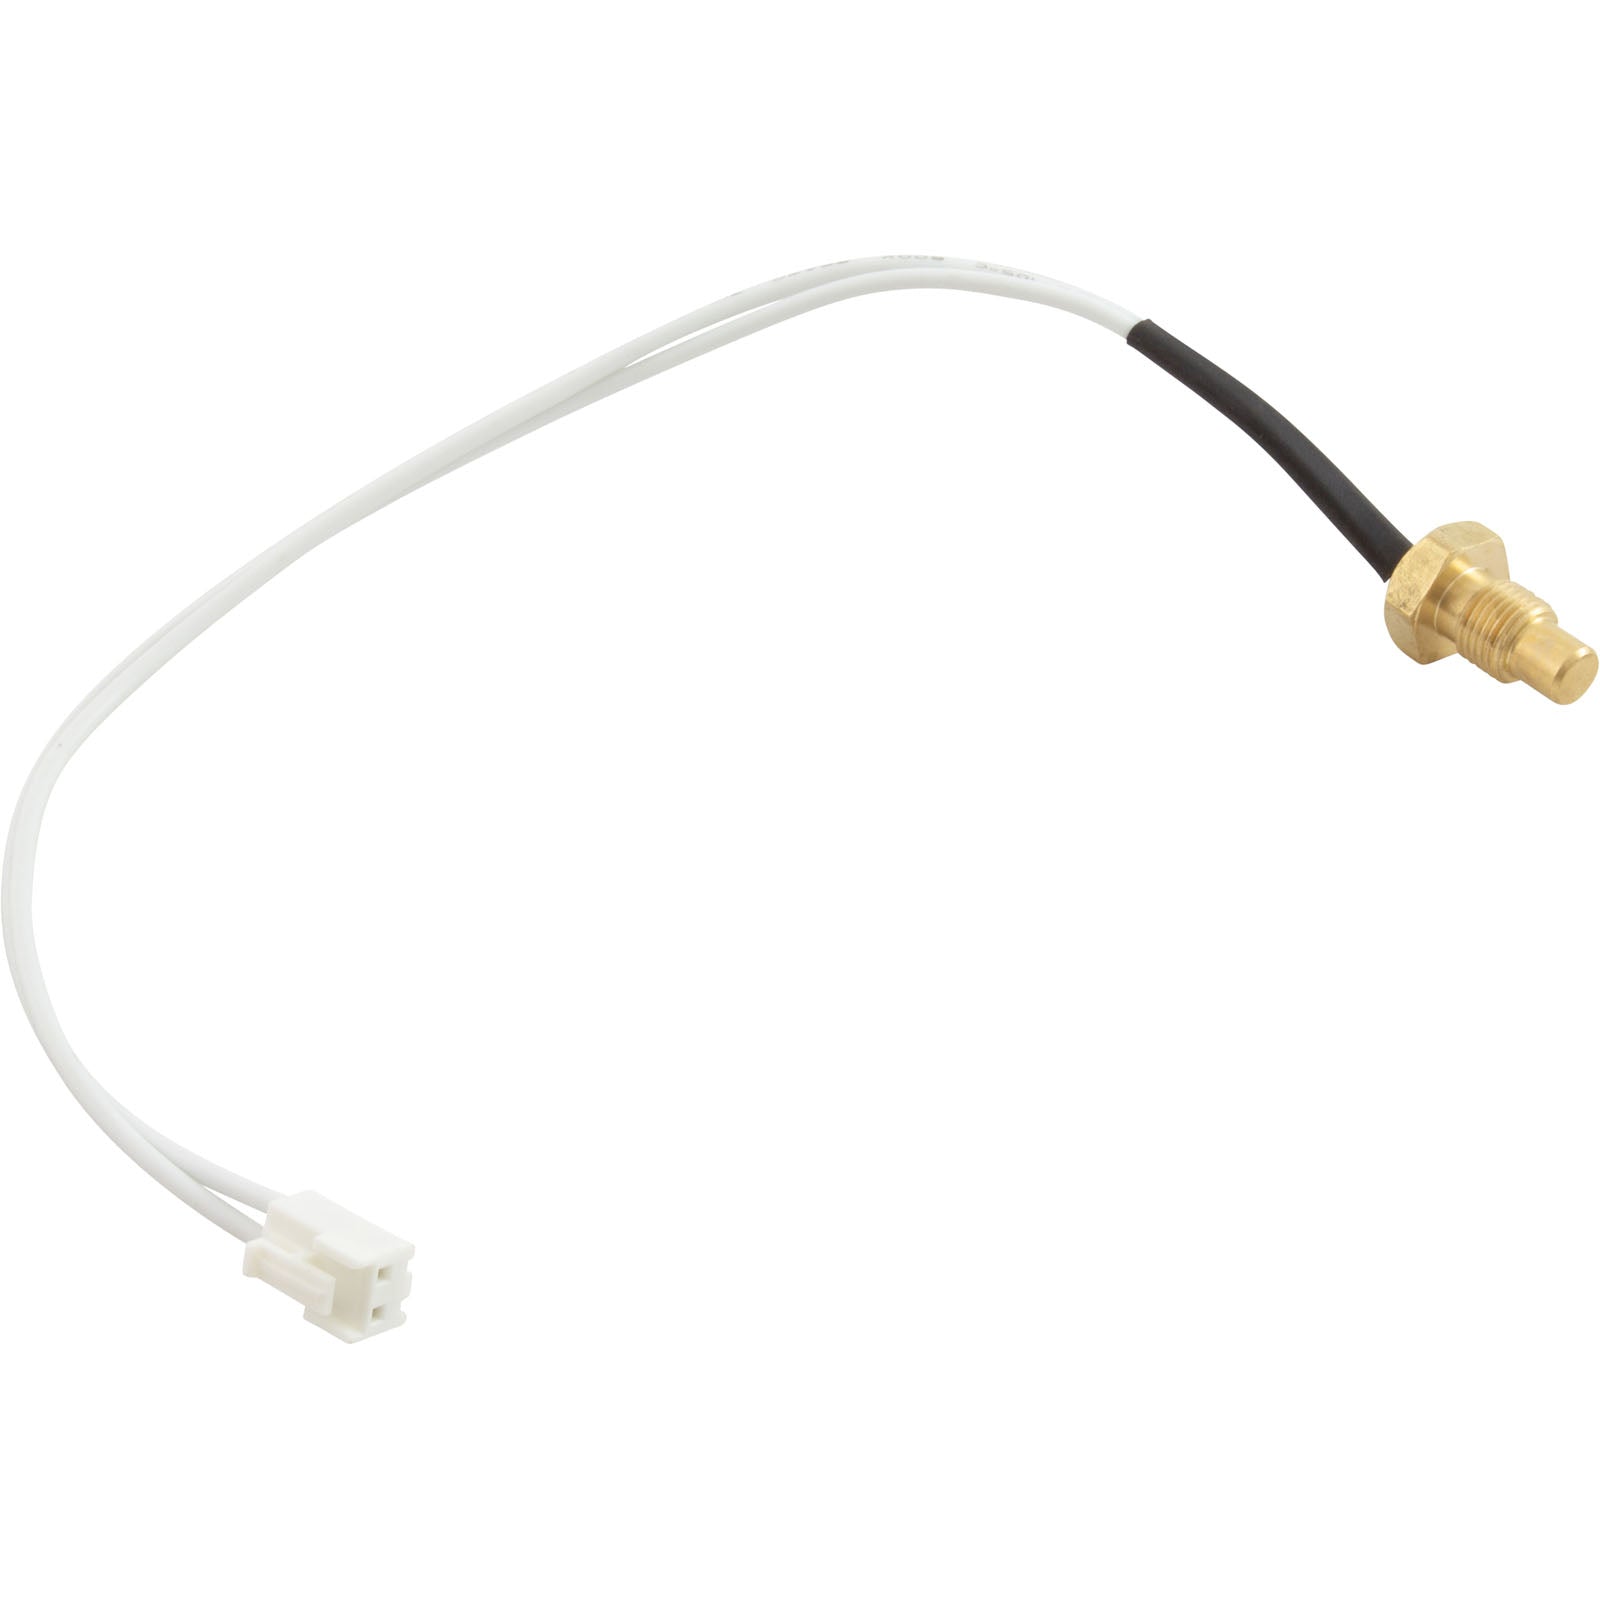 Water Sensor, Raypak, Inlet & Outlet 017161F